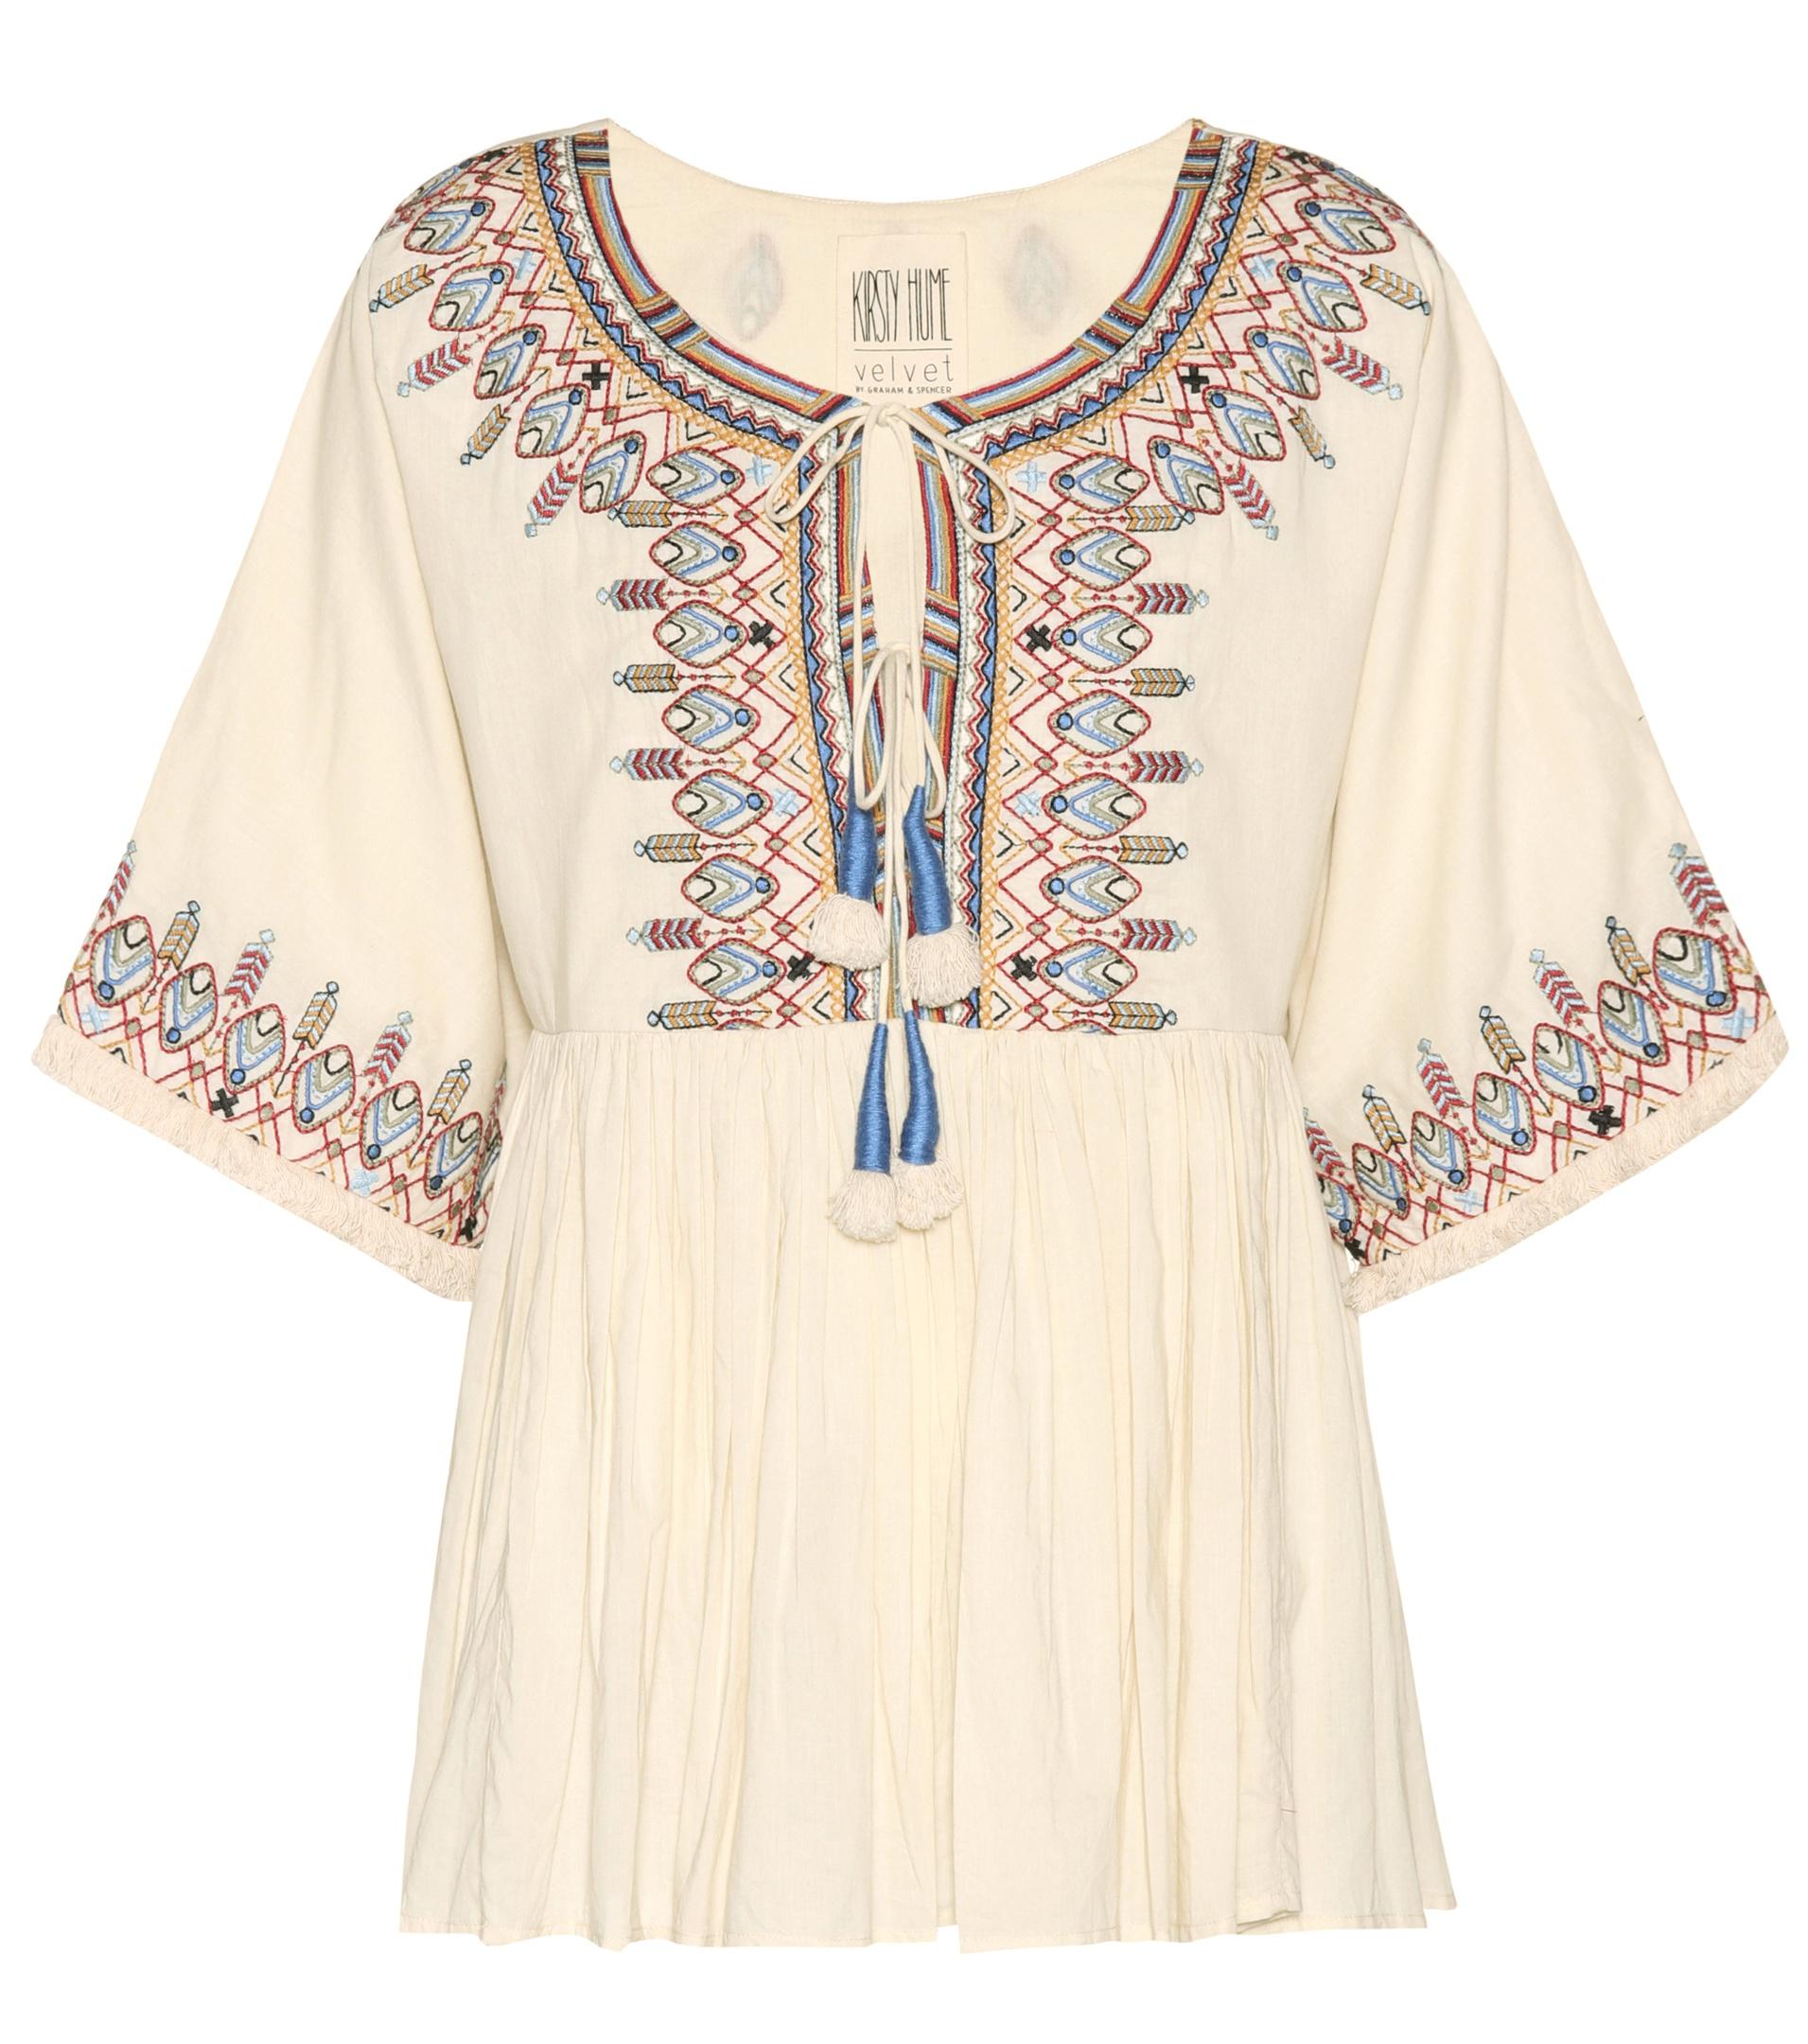 Lyst - Velvet Dahlia Embroidered Cotton Top in Natural